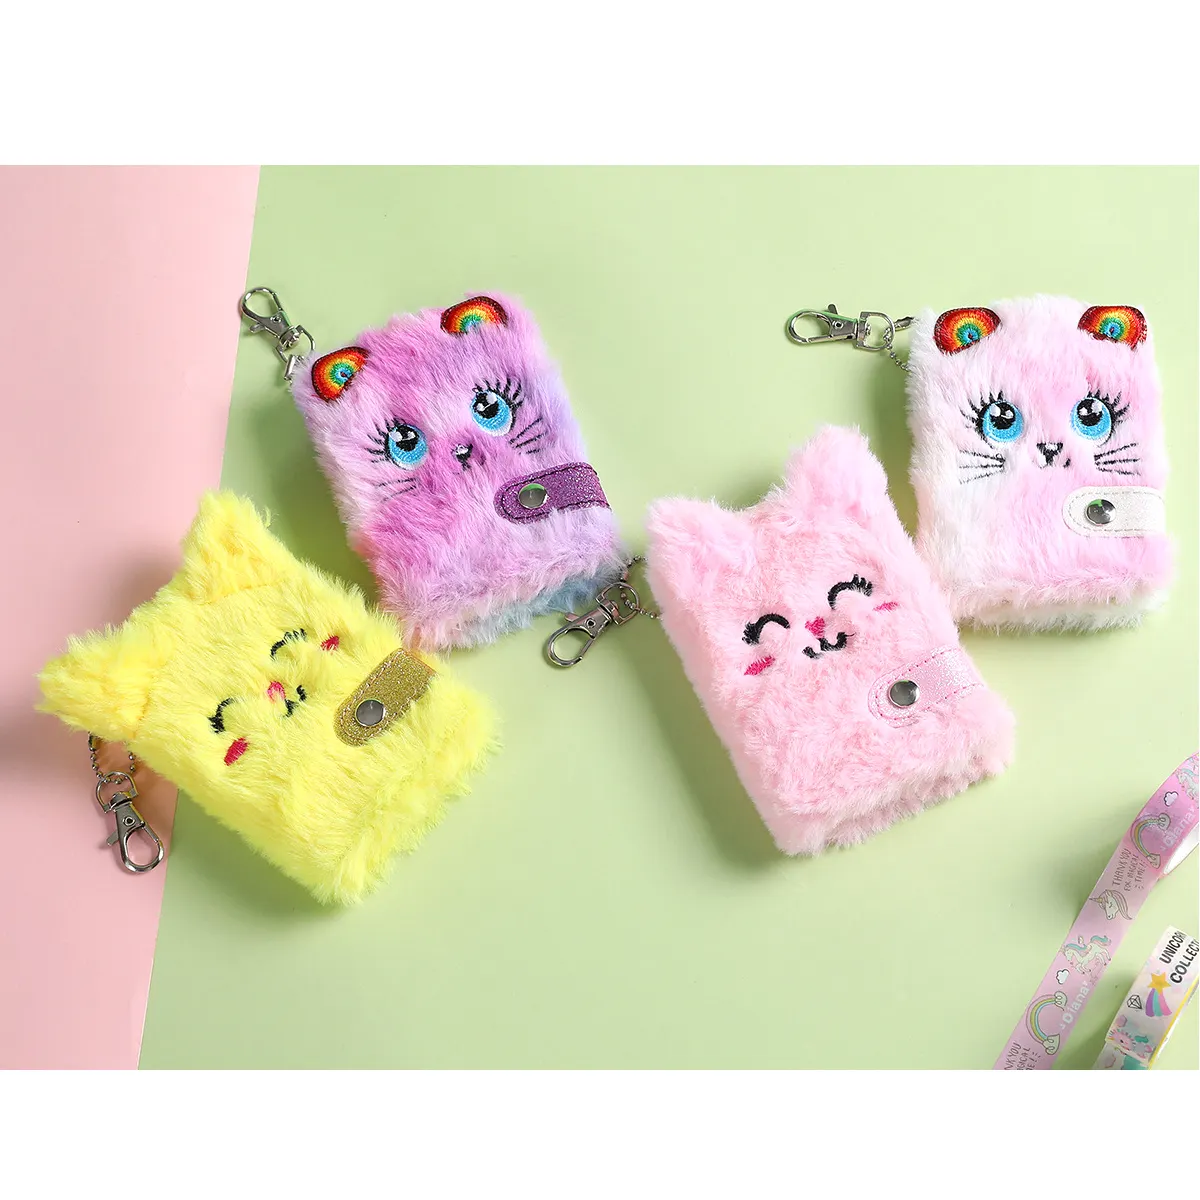 Fuzzy Writing Drawing Pad Personal Journal Diary Notepad Cute Animal Cat Face Plush Mini Pocket Notebook with Keychains